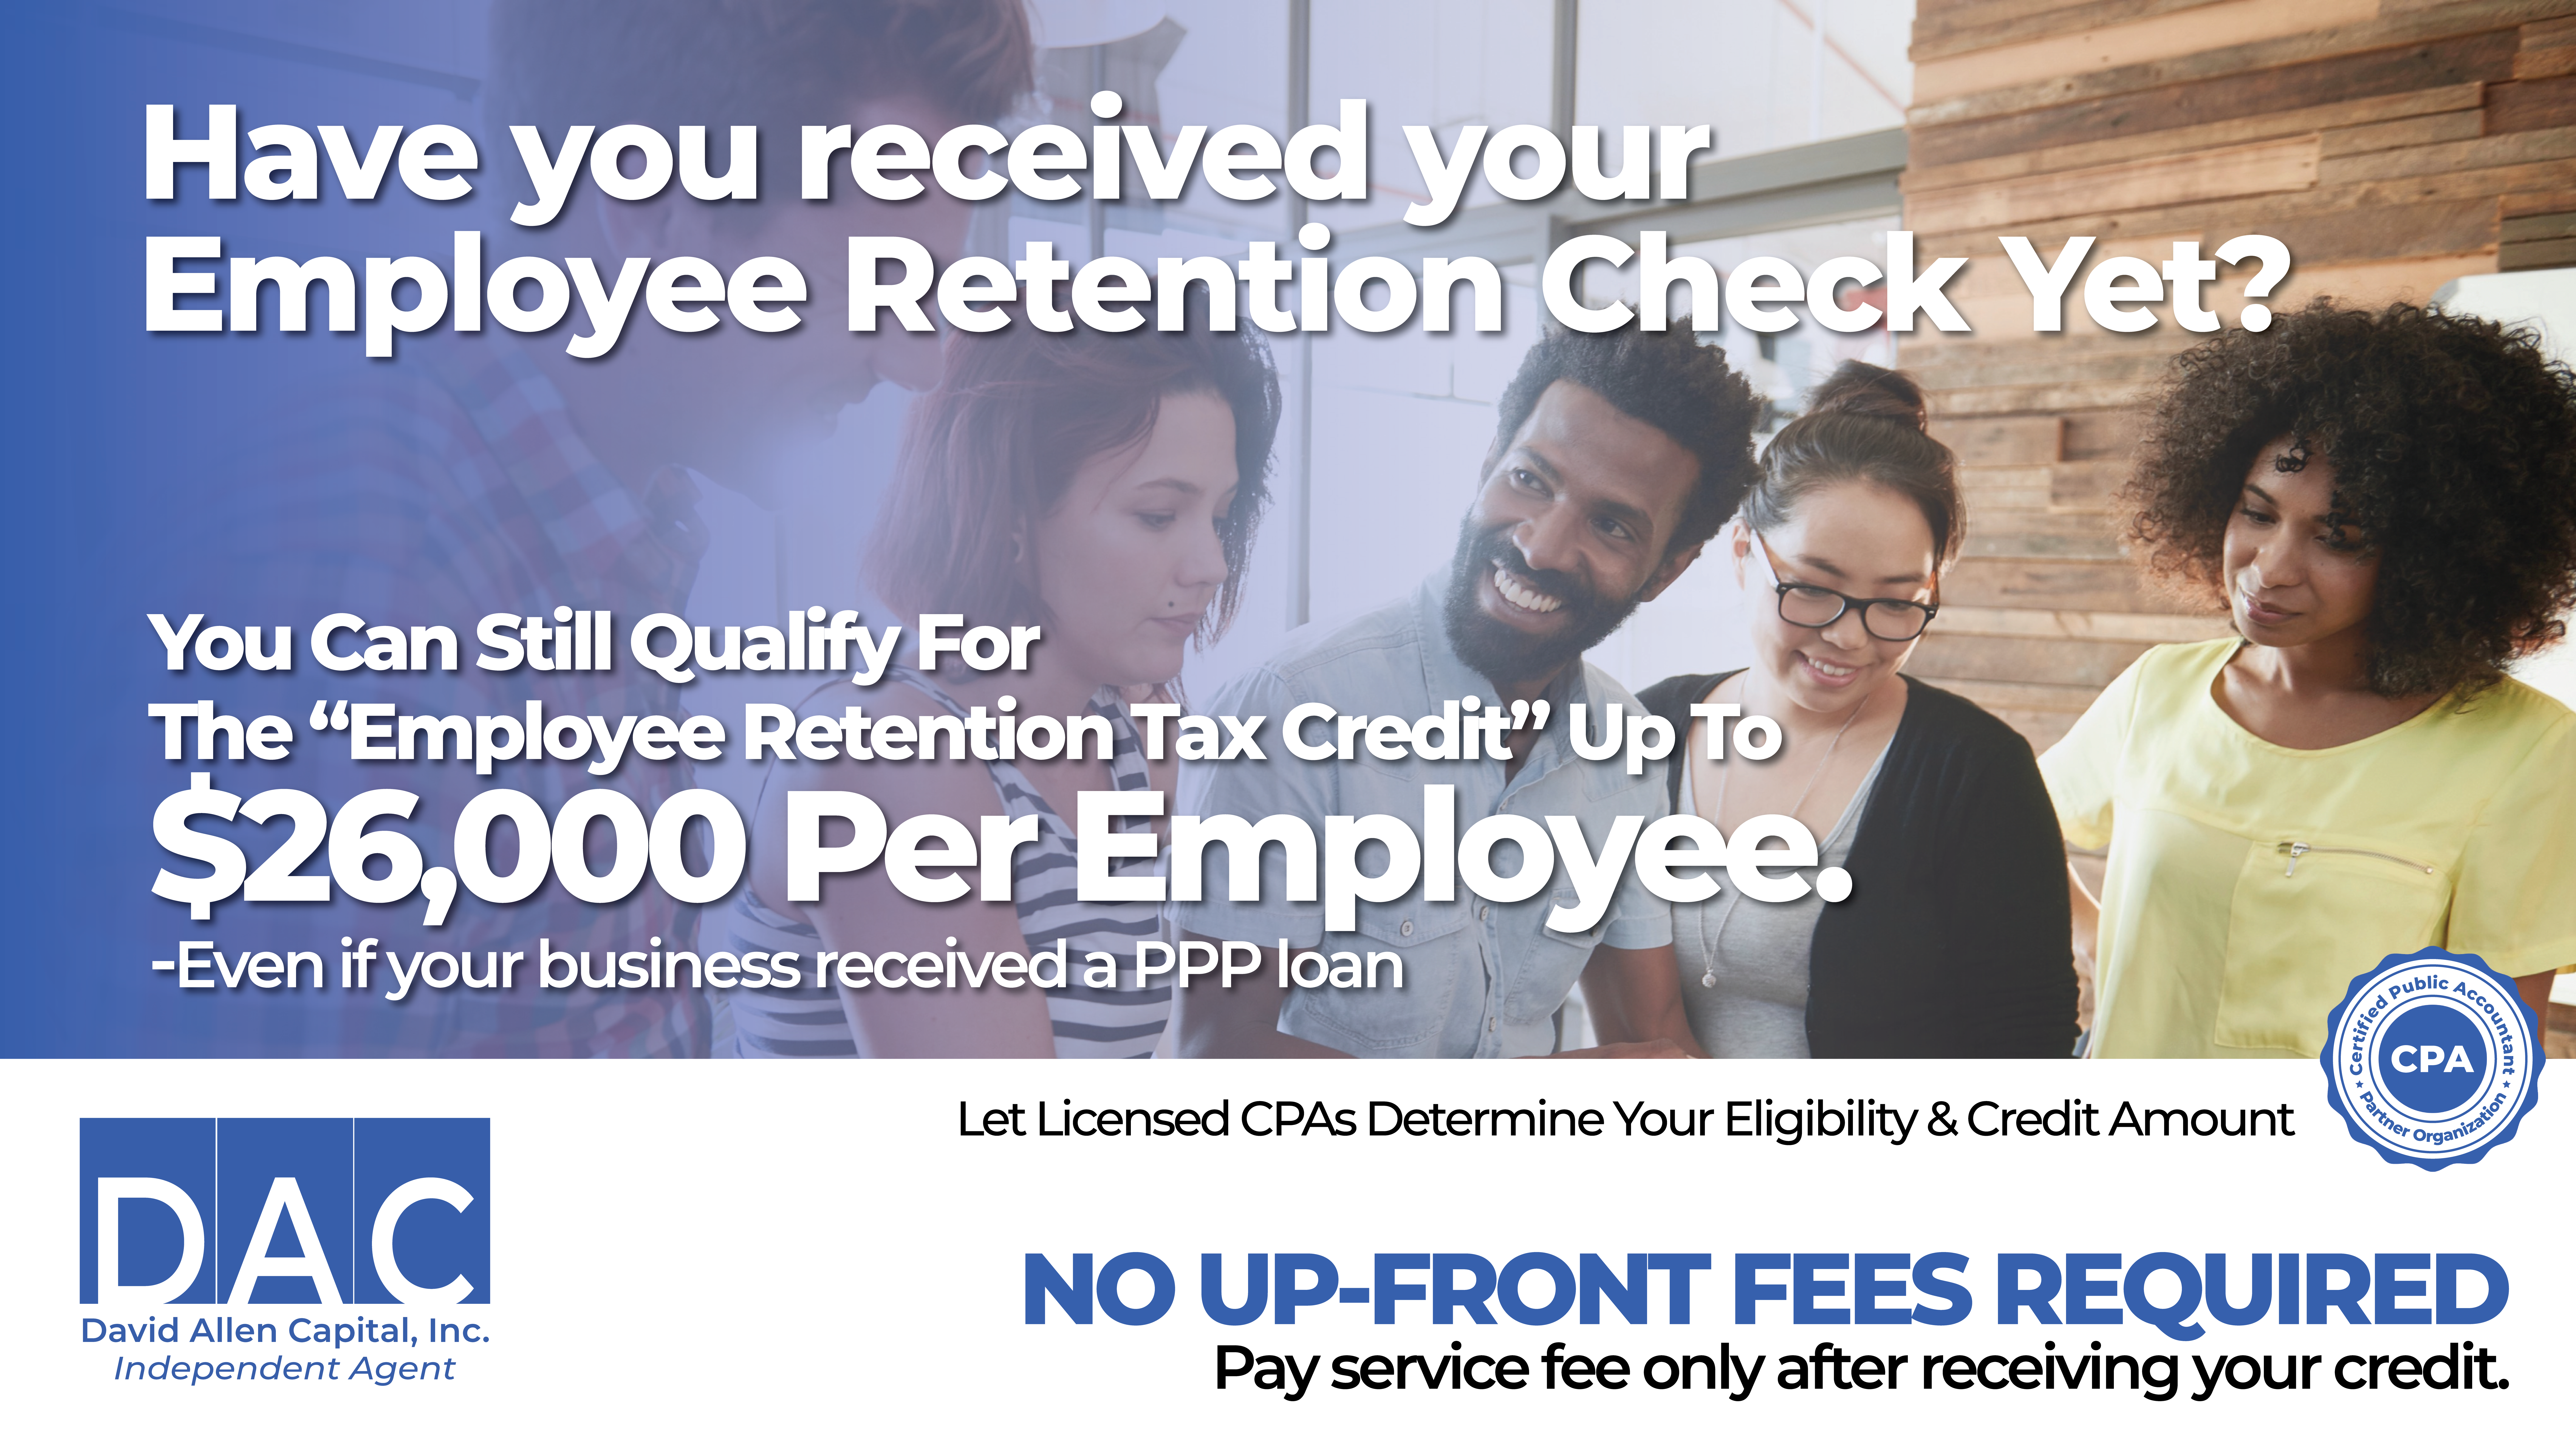 CPA’s help you claim your Employee Retention Credits (ERC) with no out of pocket cost